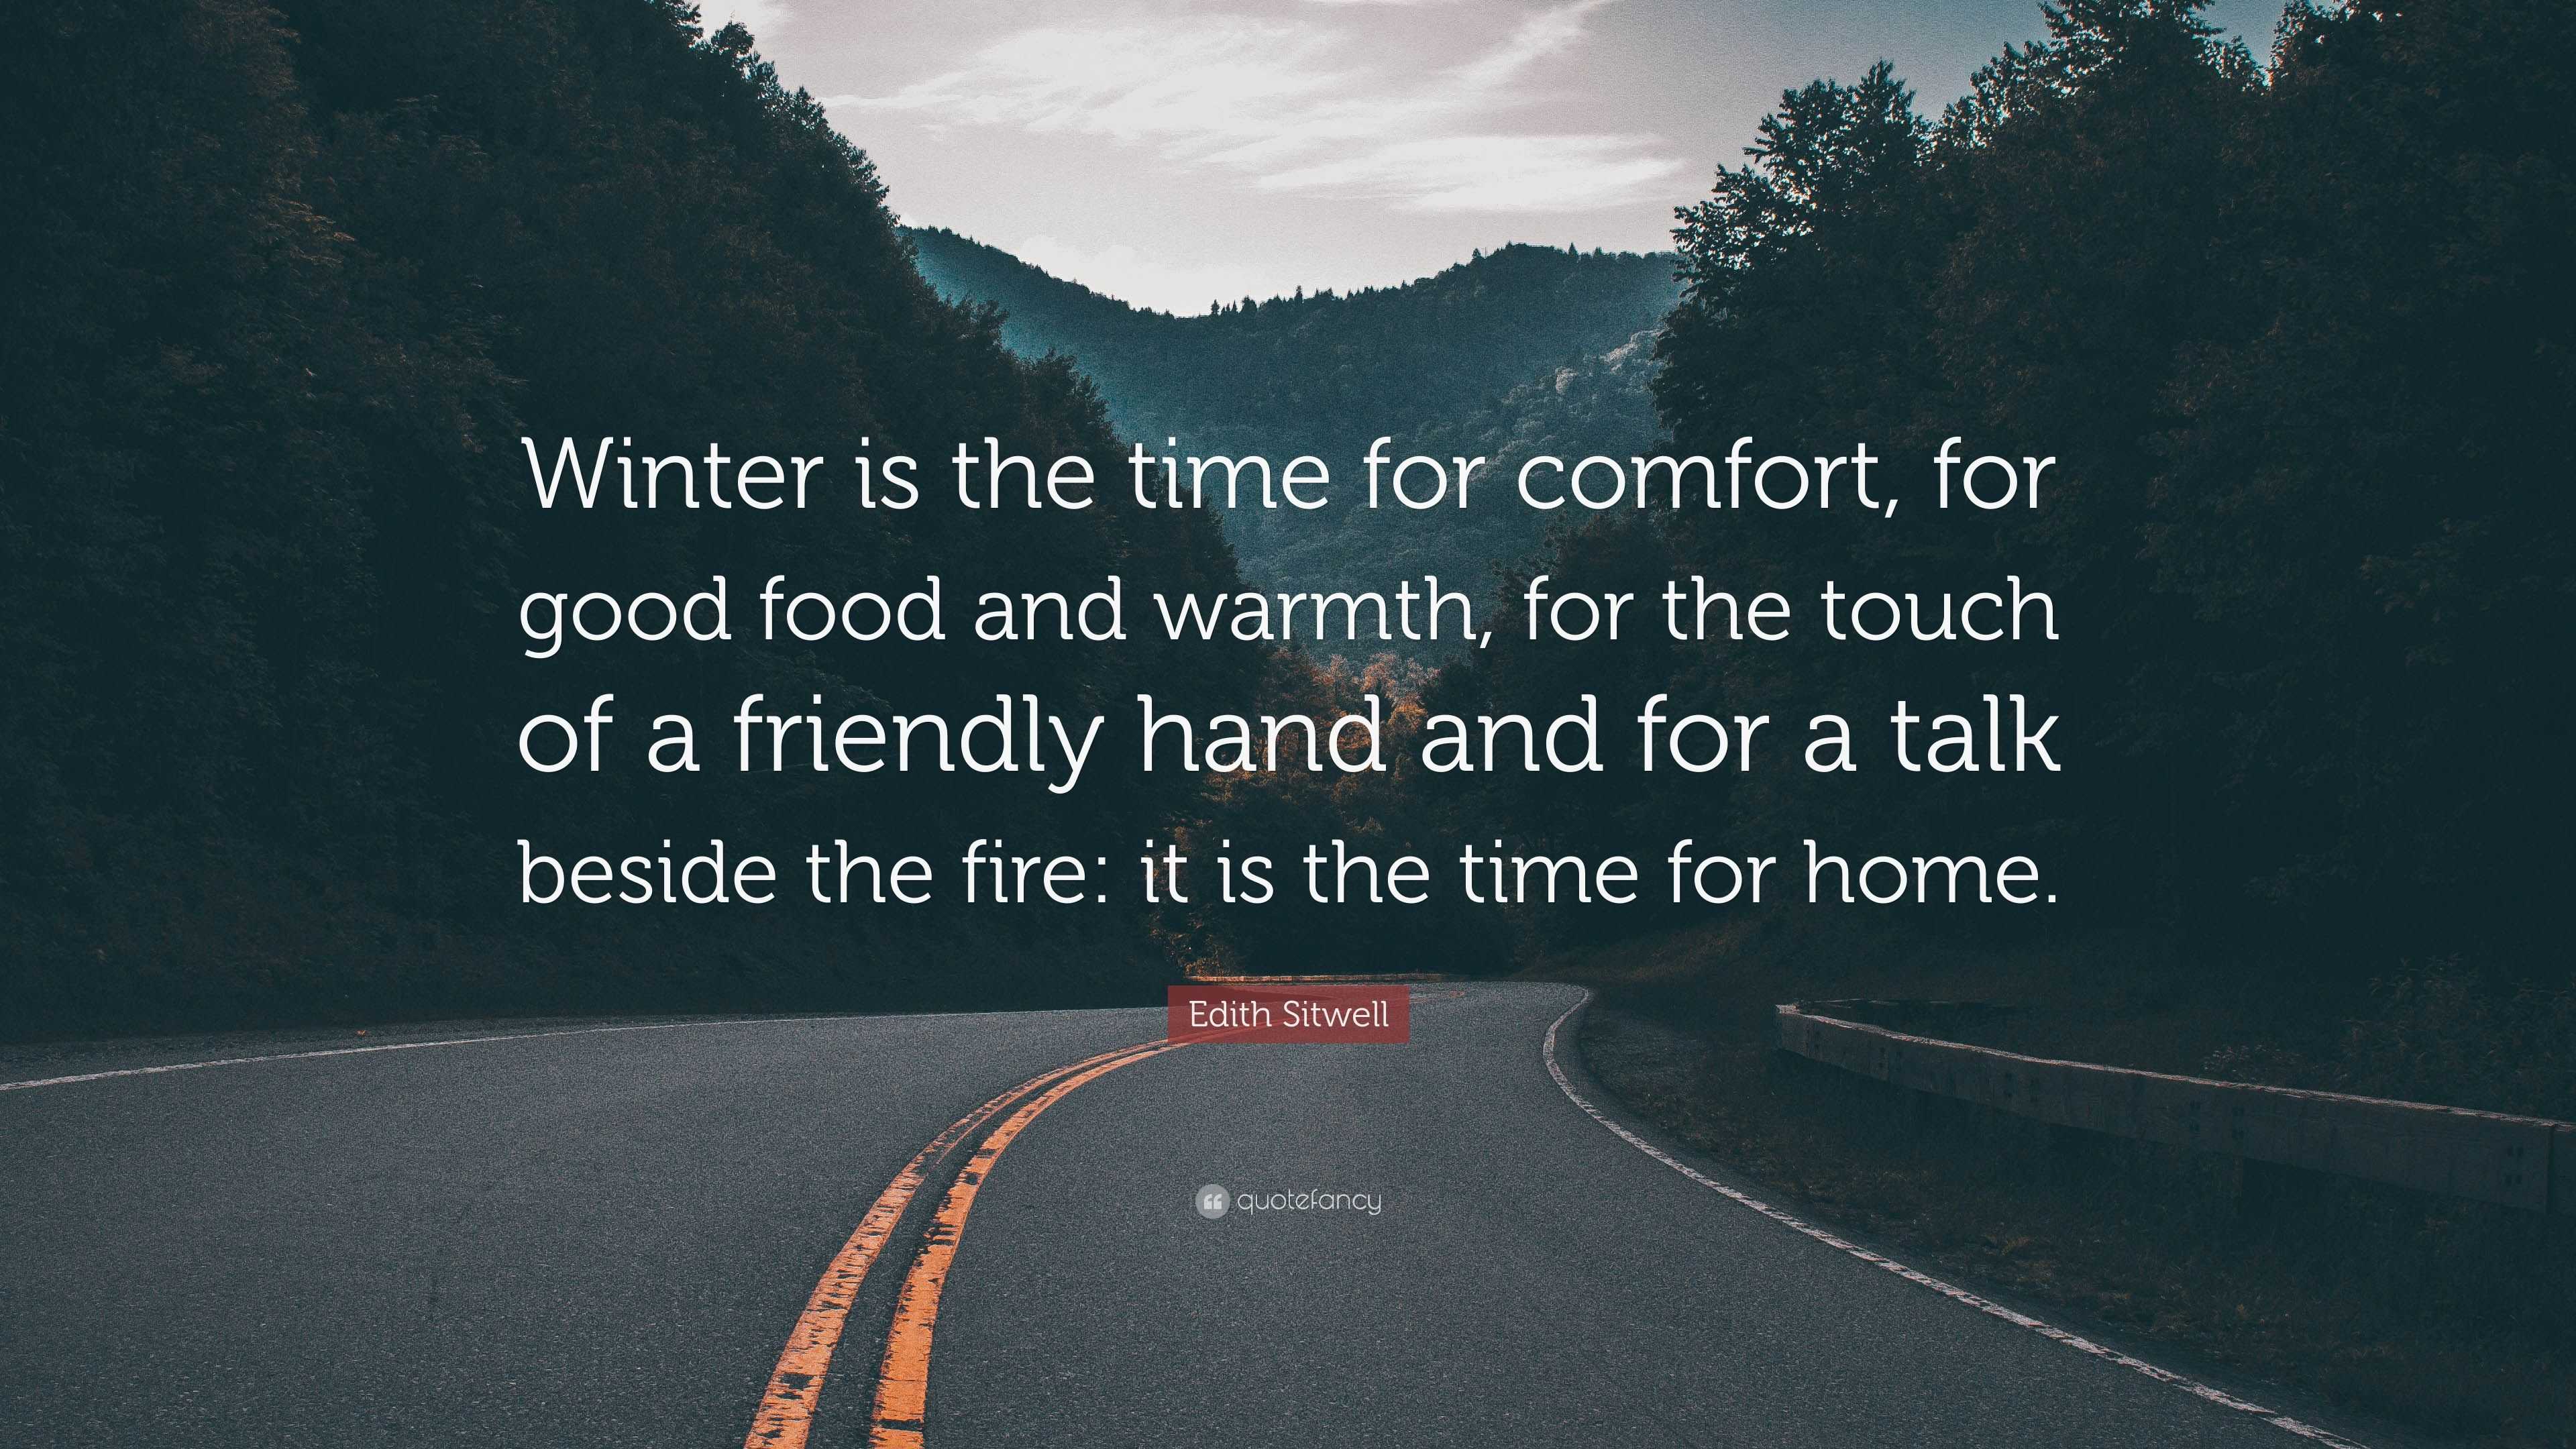 Edith Sitwell Quote: “Winter is the time for comfort, for good food and